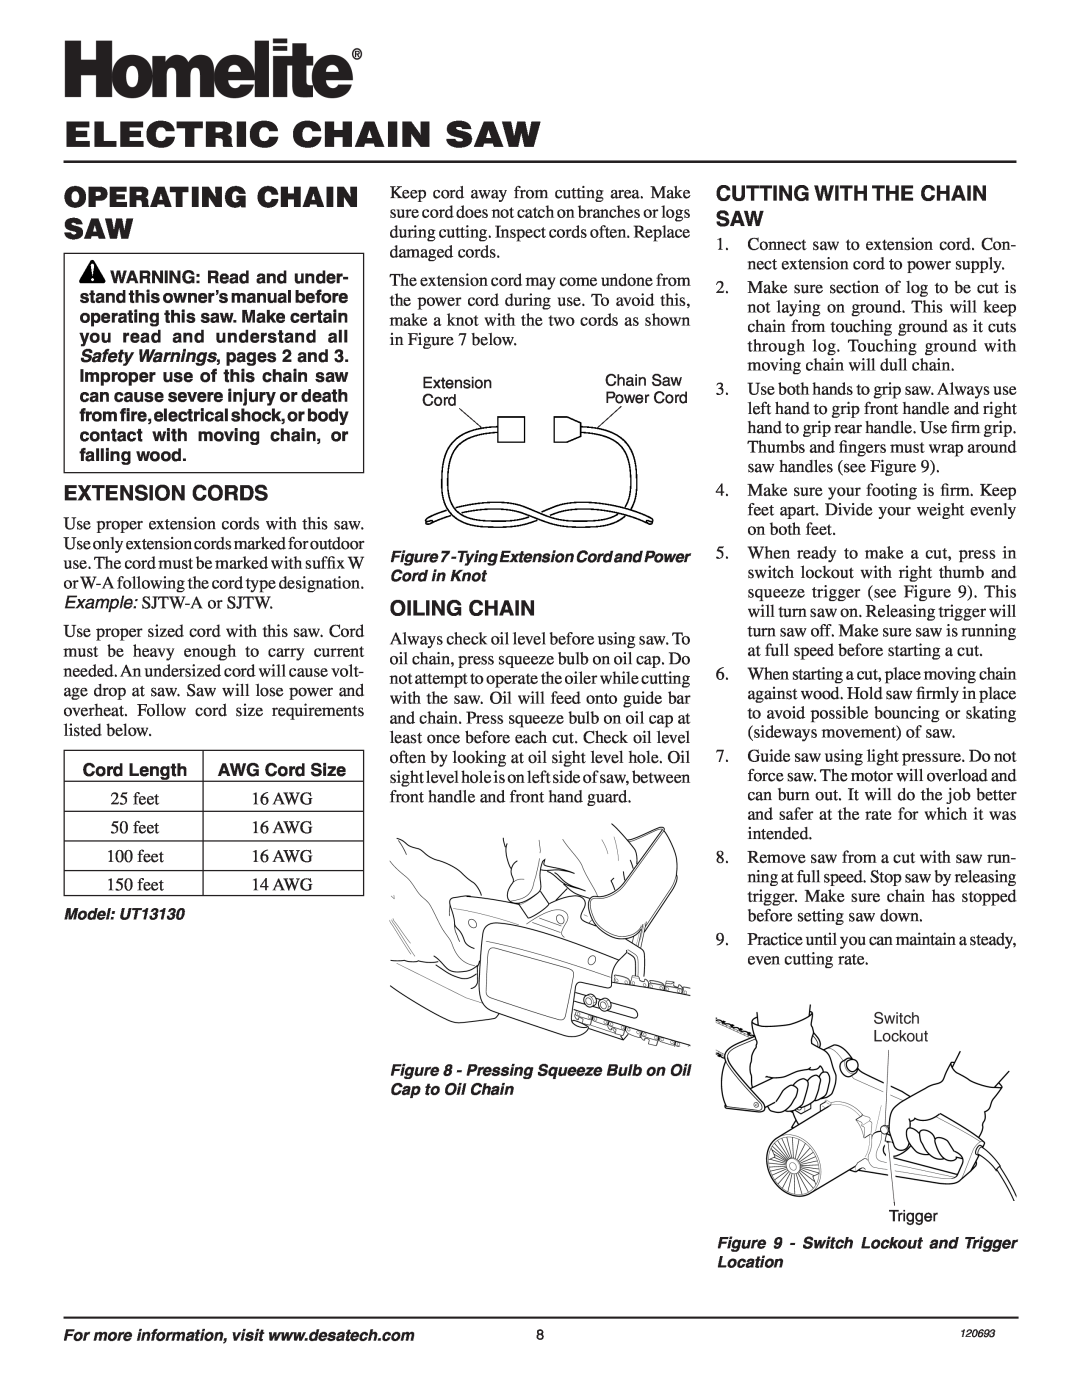 Homelite UT13130 owner manual Operating Chain Saw, Extension Cords, Oiling Chain, Cutting With The Chain Saw, Cord Length 